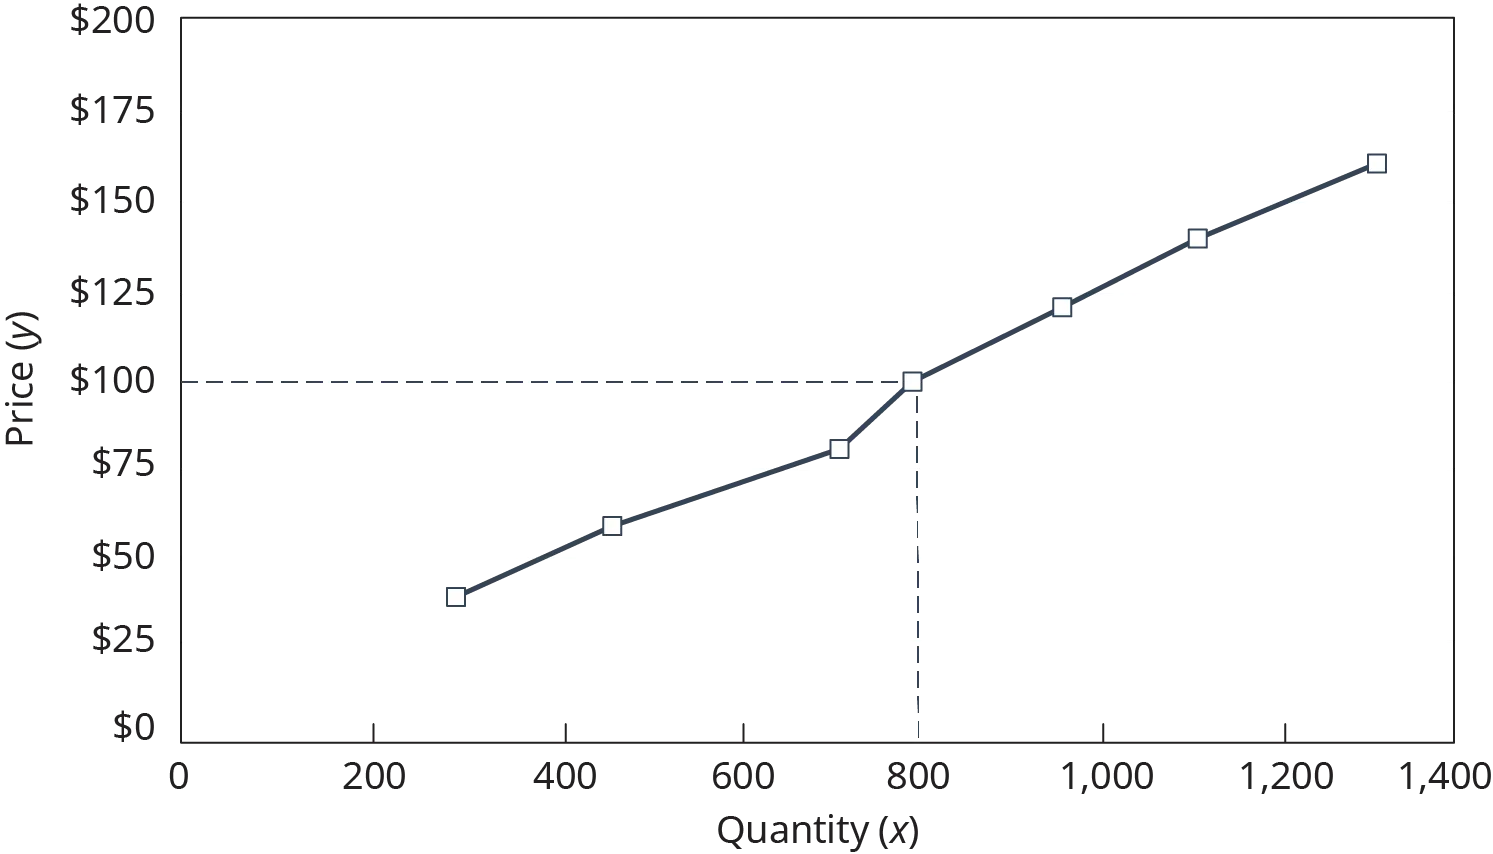 The horizontal x axis is labeled quantity, and is labeled from left to right, 0 to 1,400 in increments of 200. The vertical y axis is labeled price, and is labeled, from bottom to top, 0 dollars to 200 dollars in increments of $25. Points are plotted on the graph, and connected with a solid line. The points are plotted at approximately 275, $40, and 450, $60, and 700, $80, and 800, $100, and 975, $120, and 1100, $135, and 1325, $155. A dashed horizontal line extends from 100 dollars on the y axis, and a vertical dashed line extends from 800 on the x axis and meet at the plotted point 800, $100.